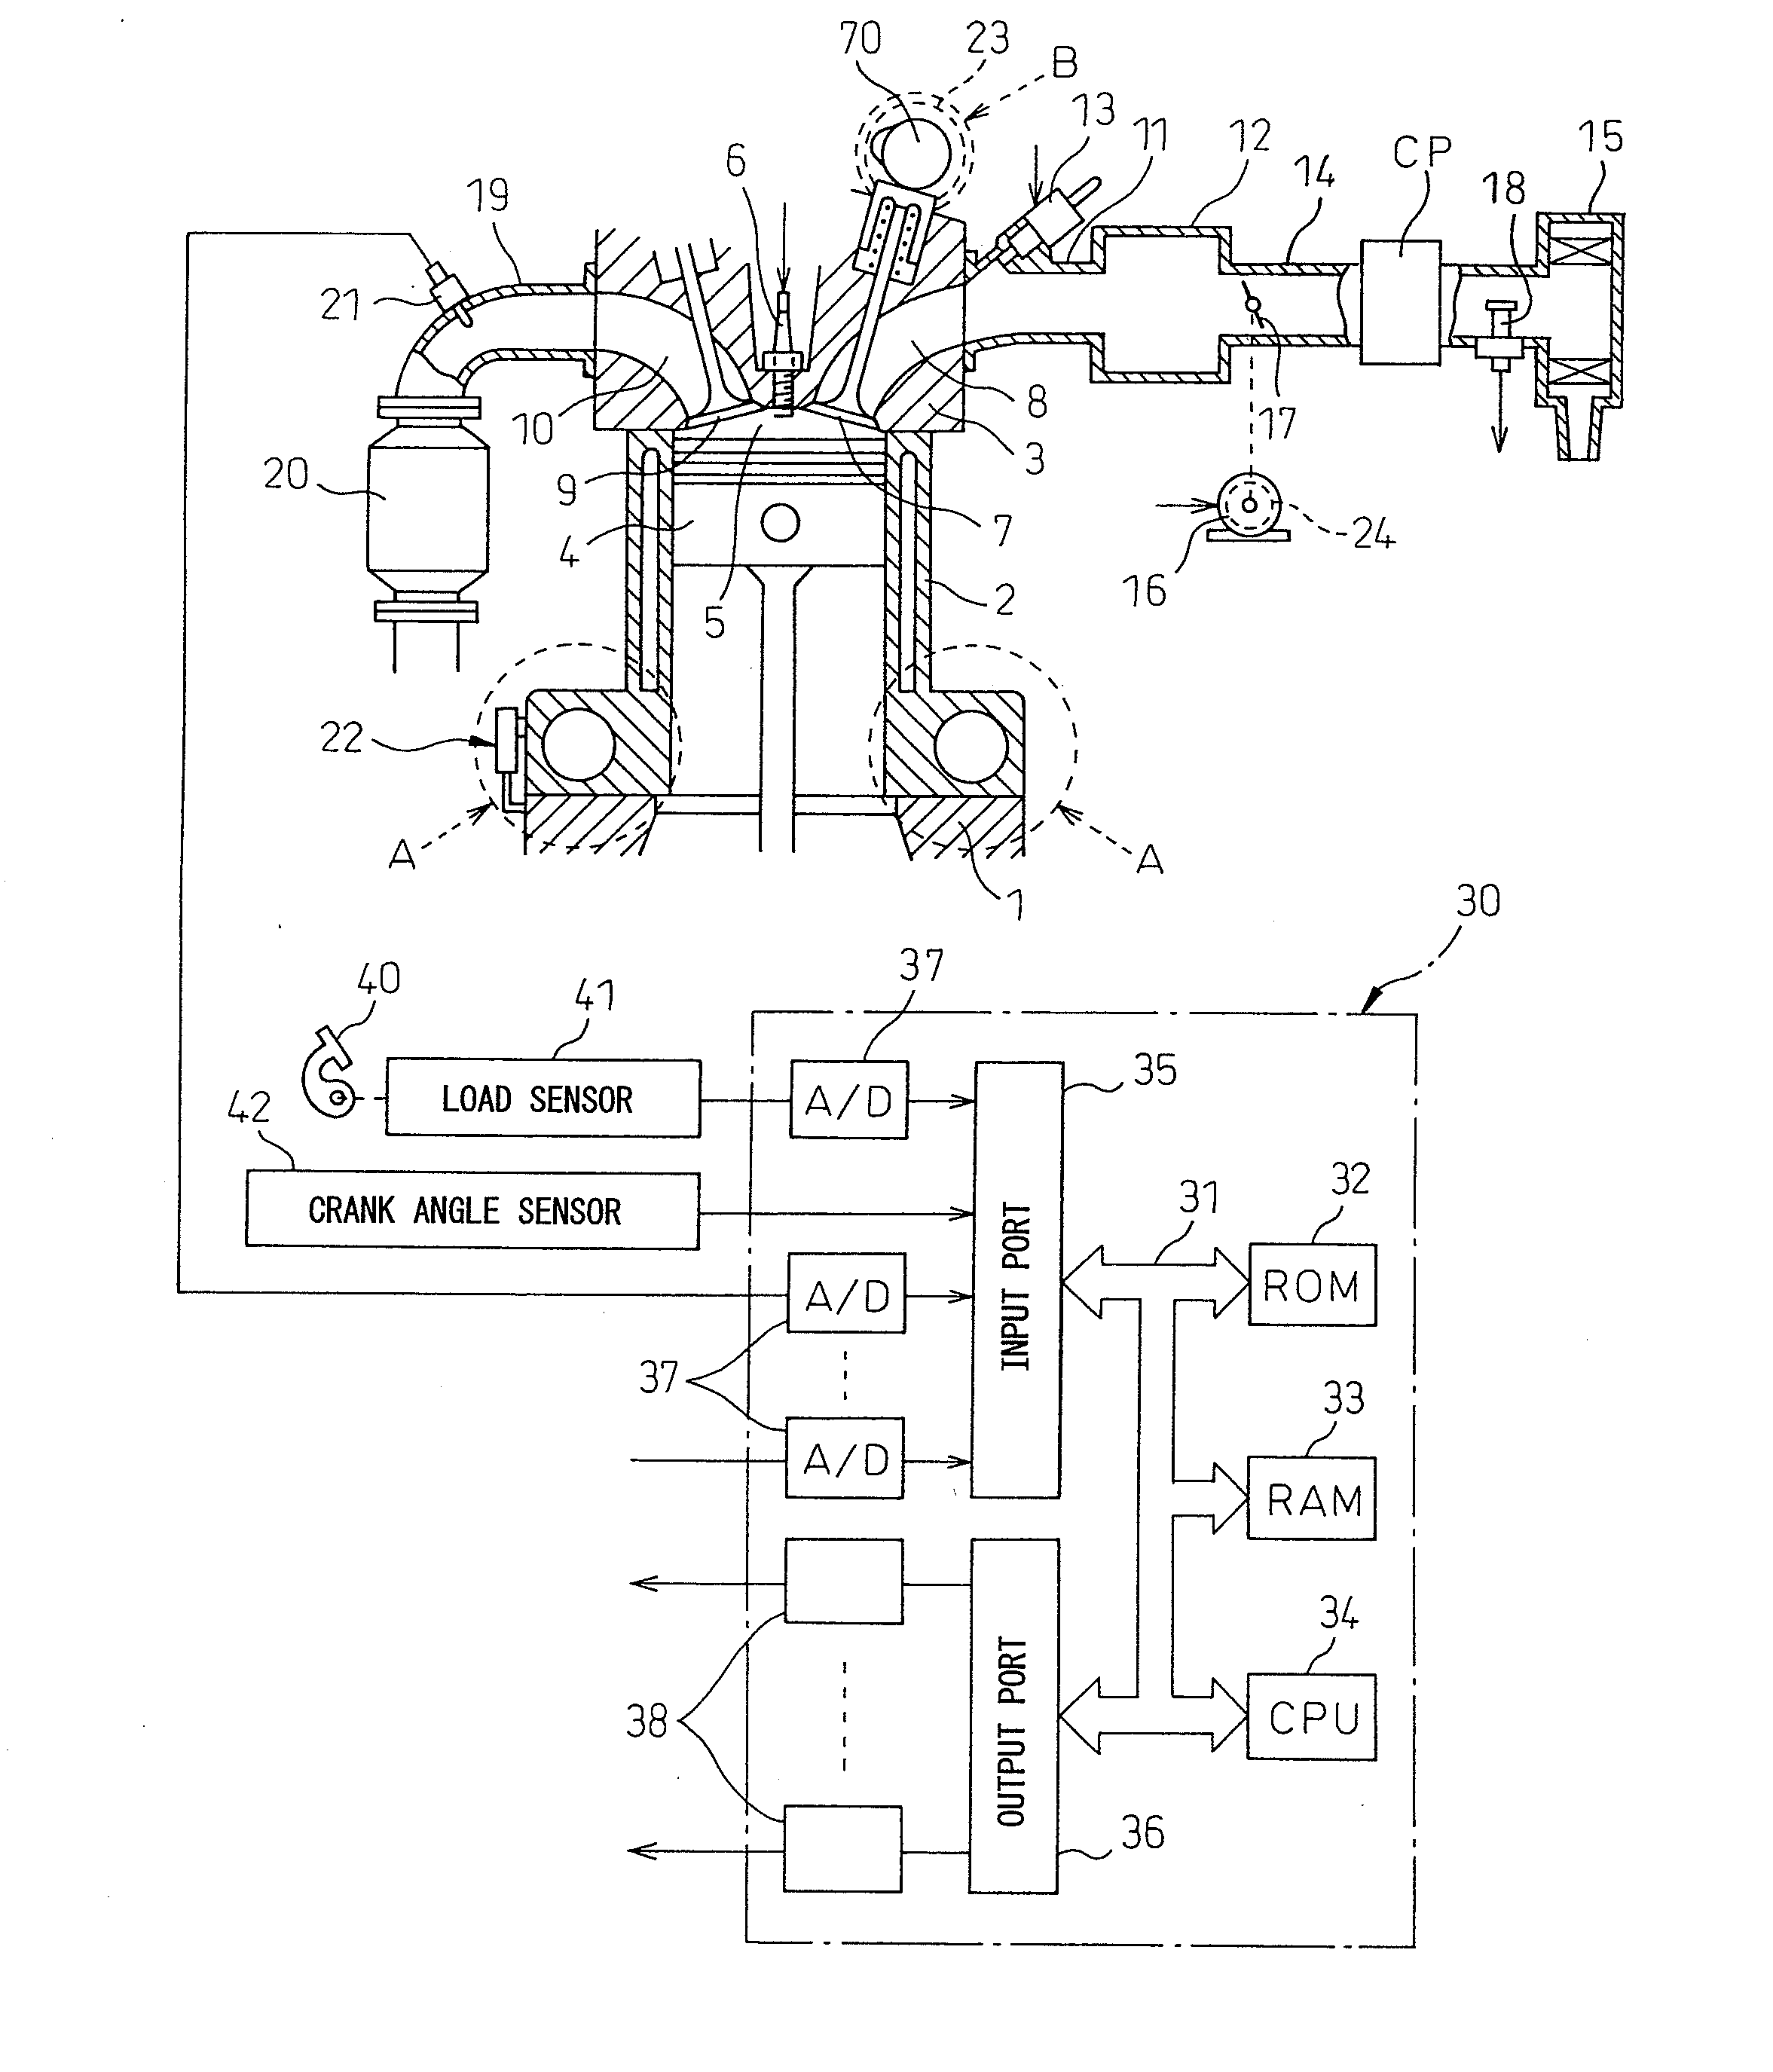 Spark ignition-type internal combustion engine